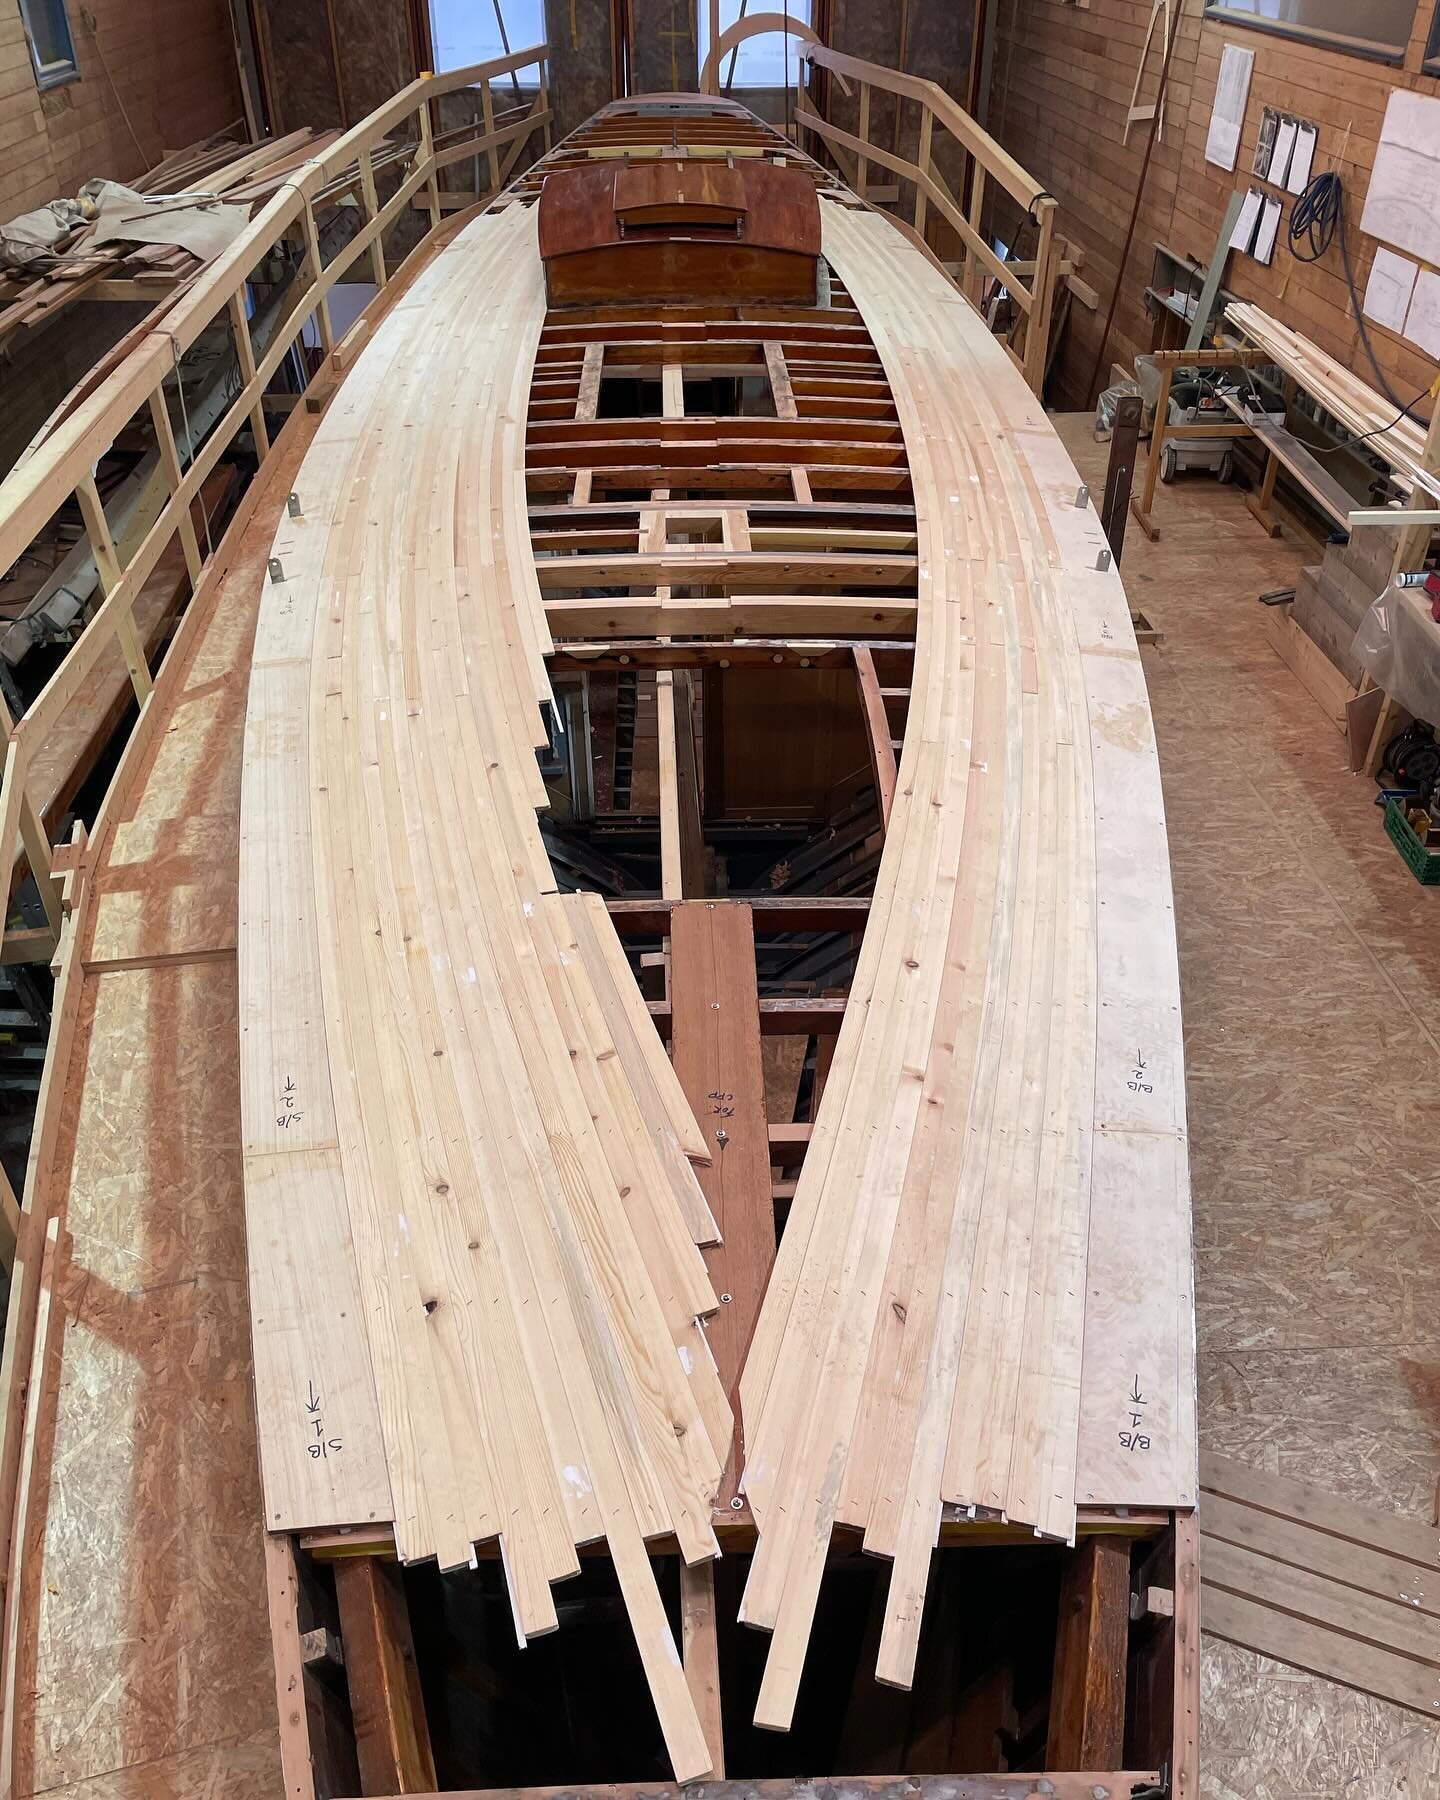 The first layer on Mobella&rsquo;s deck is really coming together. 😃
&bull;
&bull;
&bull;
#woodenboat #boatbuilding #restoration #woodworking #wood #boat #yacht #sailing #explorepage #shipwrights #workshop #tools #boatrepair #winter #oslo #diy #norw